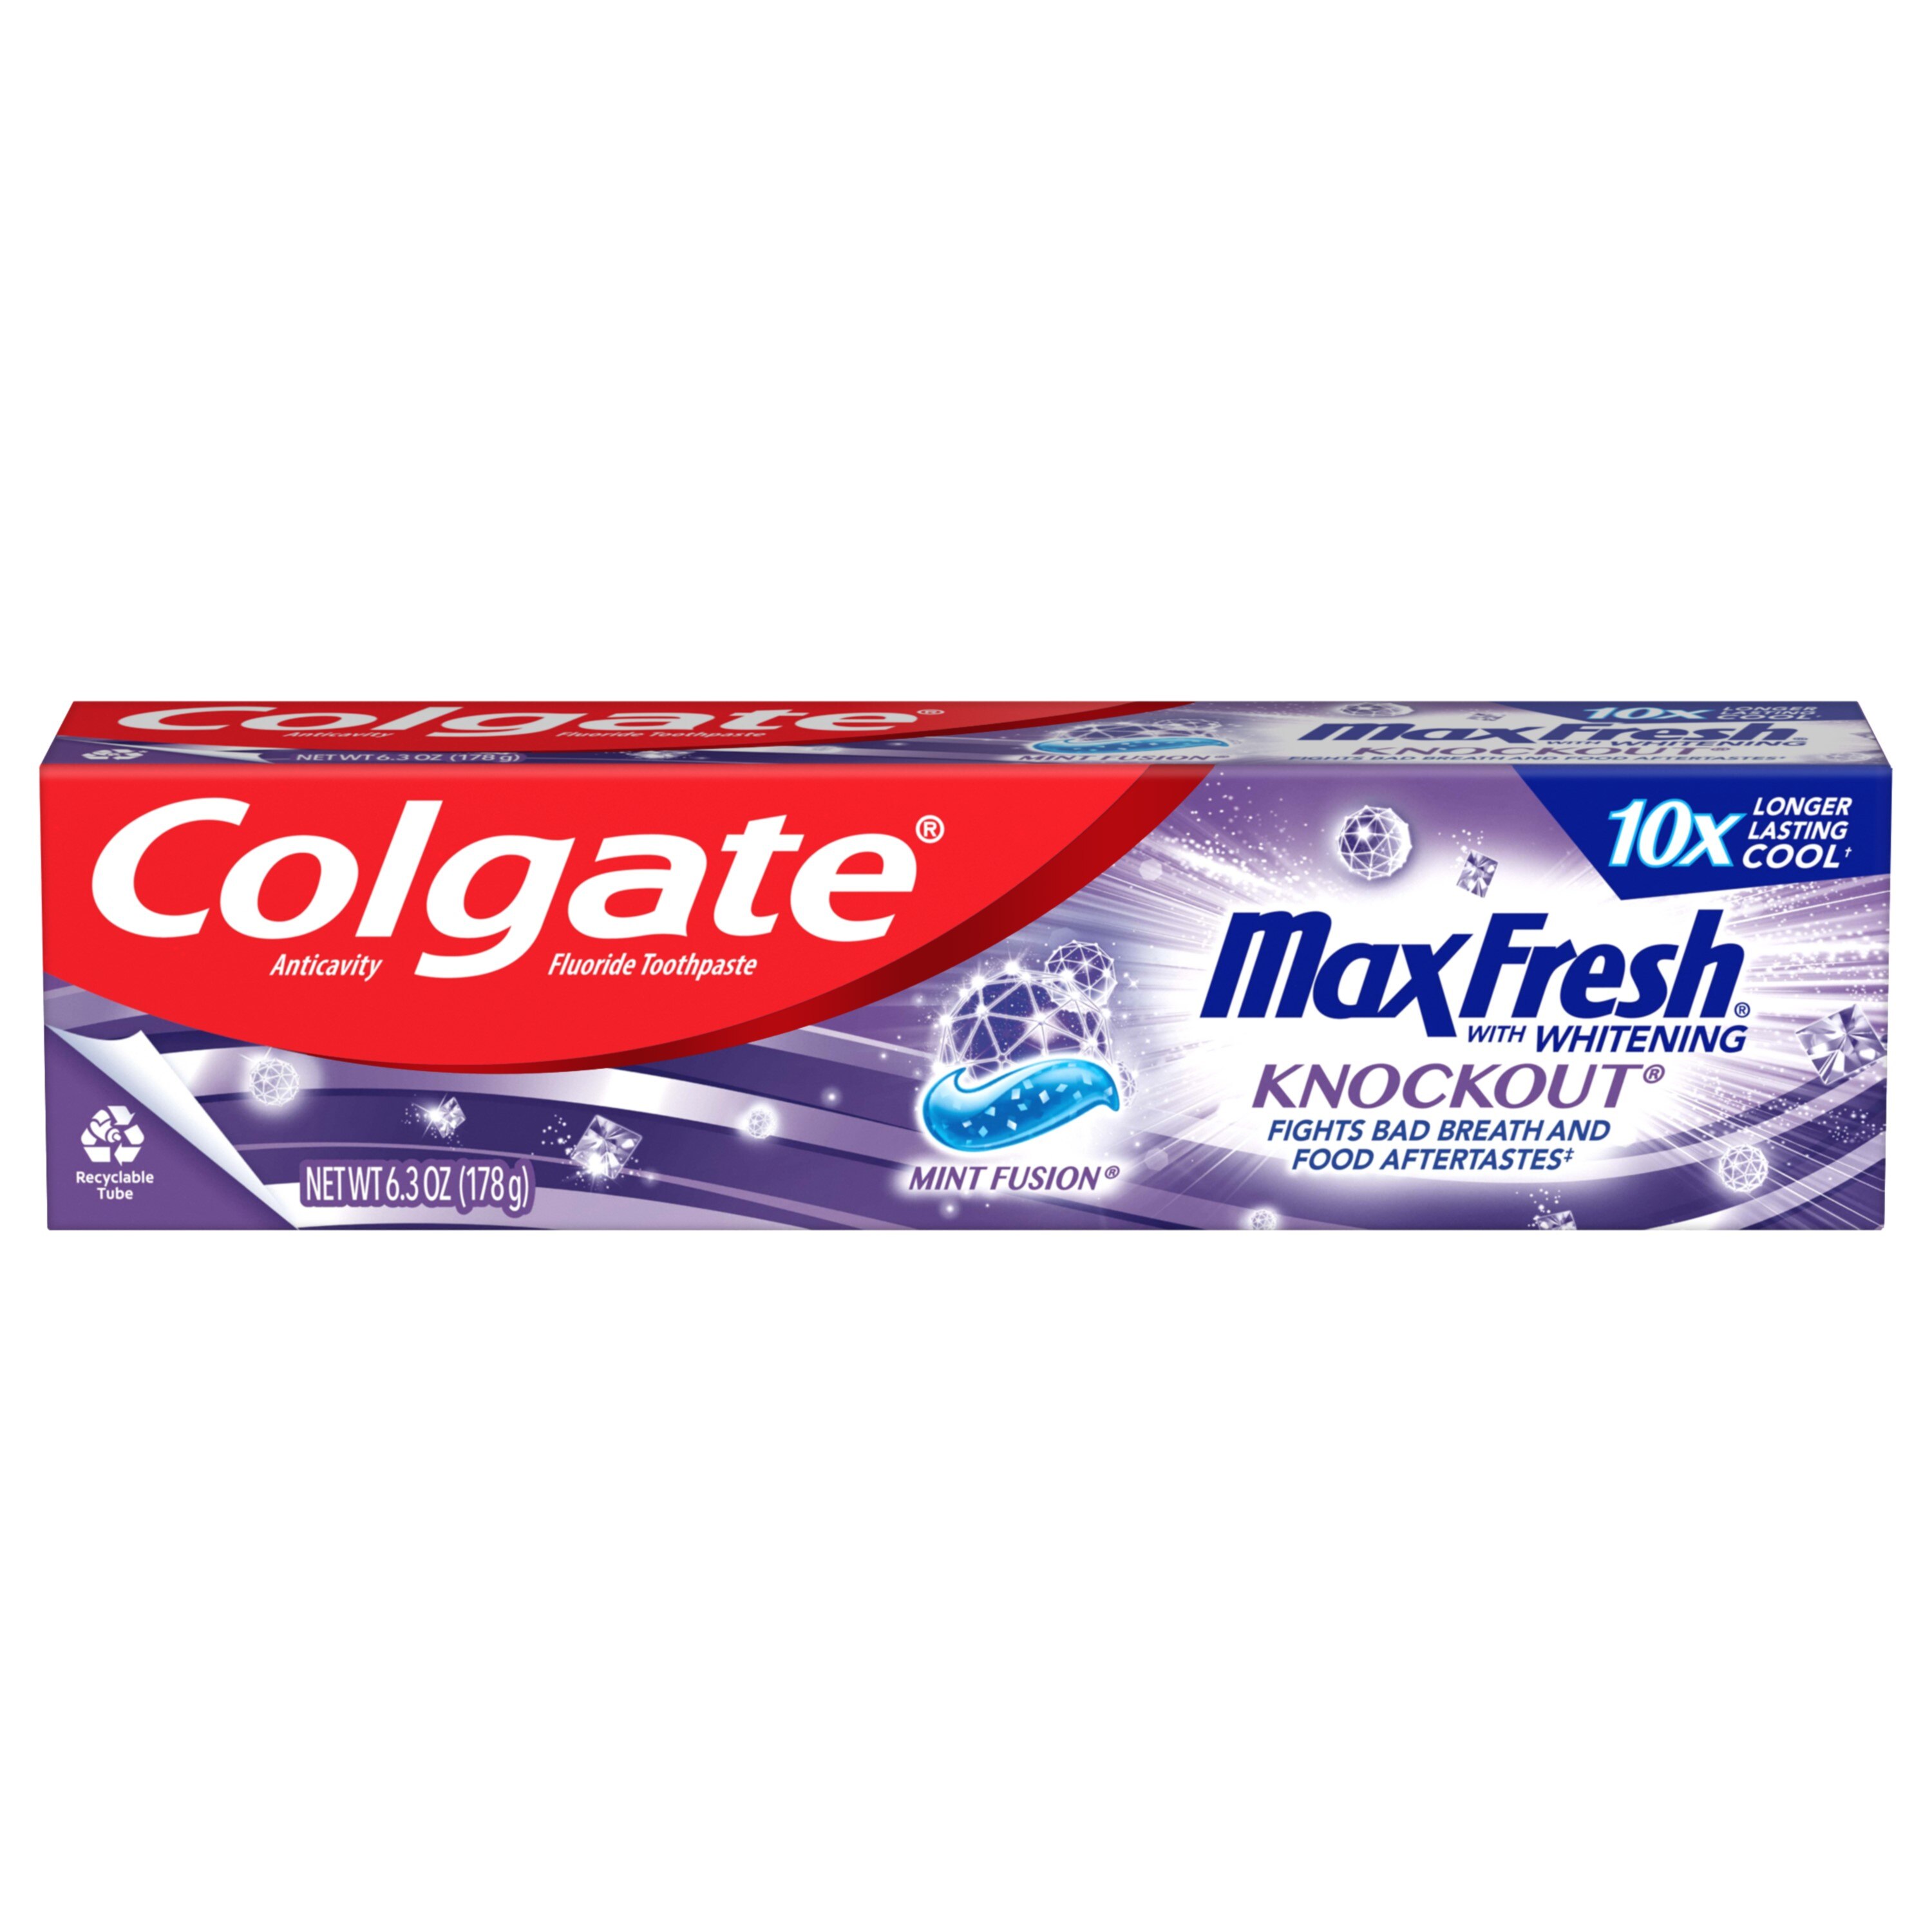 Colgate Max Fresh with Whitening Knockout Toothpaste, Mint Fusion, 6.3 OZ